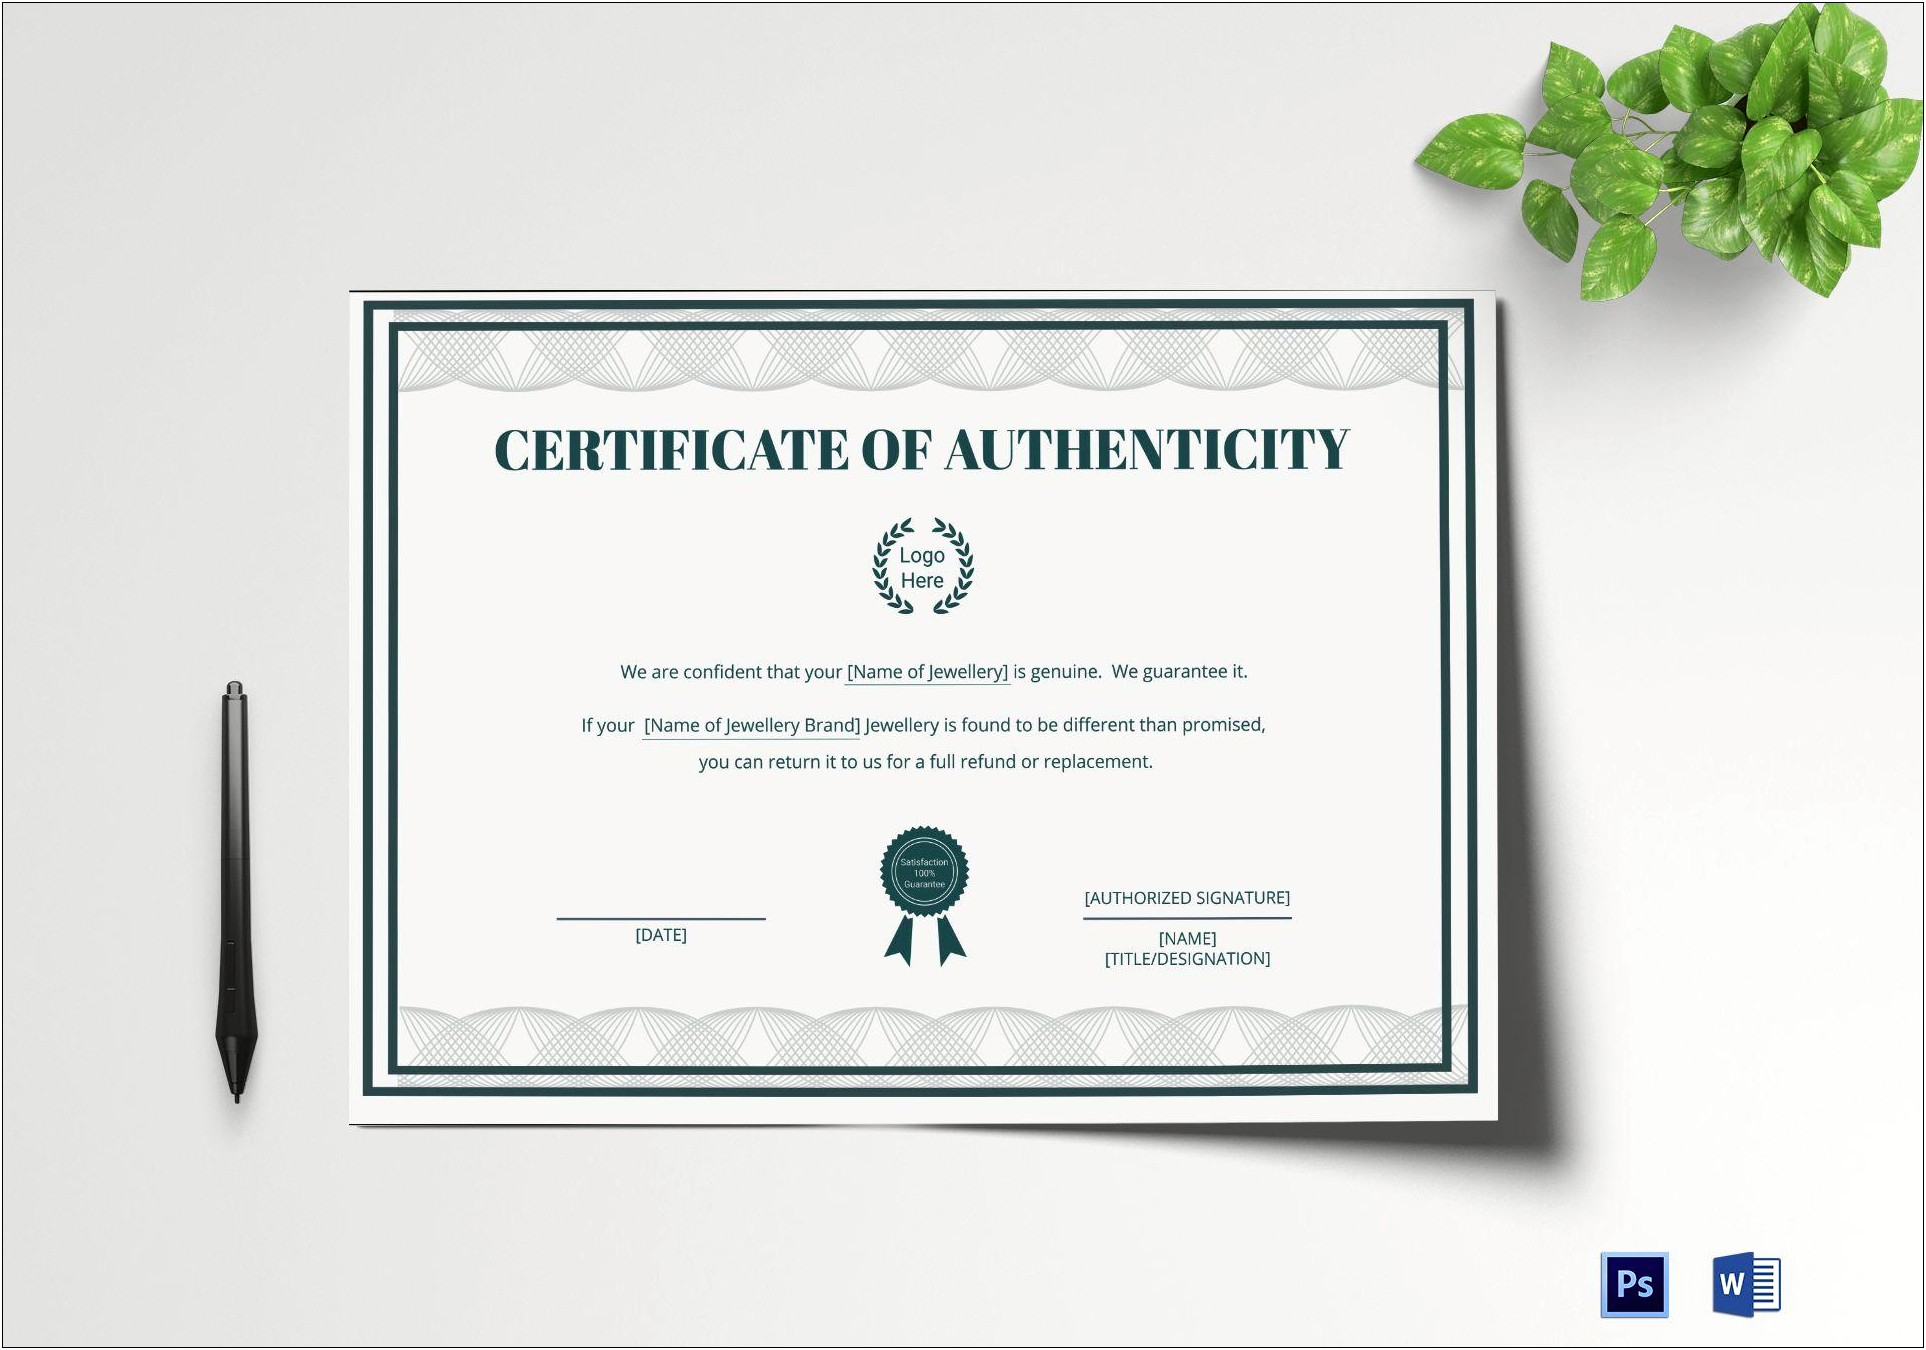 Ms Word Certificate Of Authenticity Template